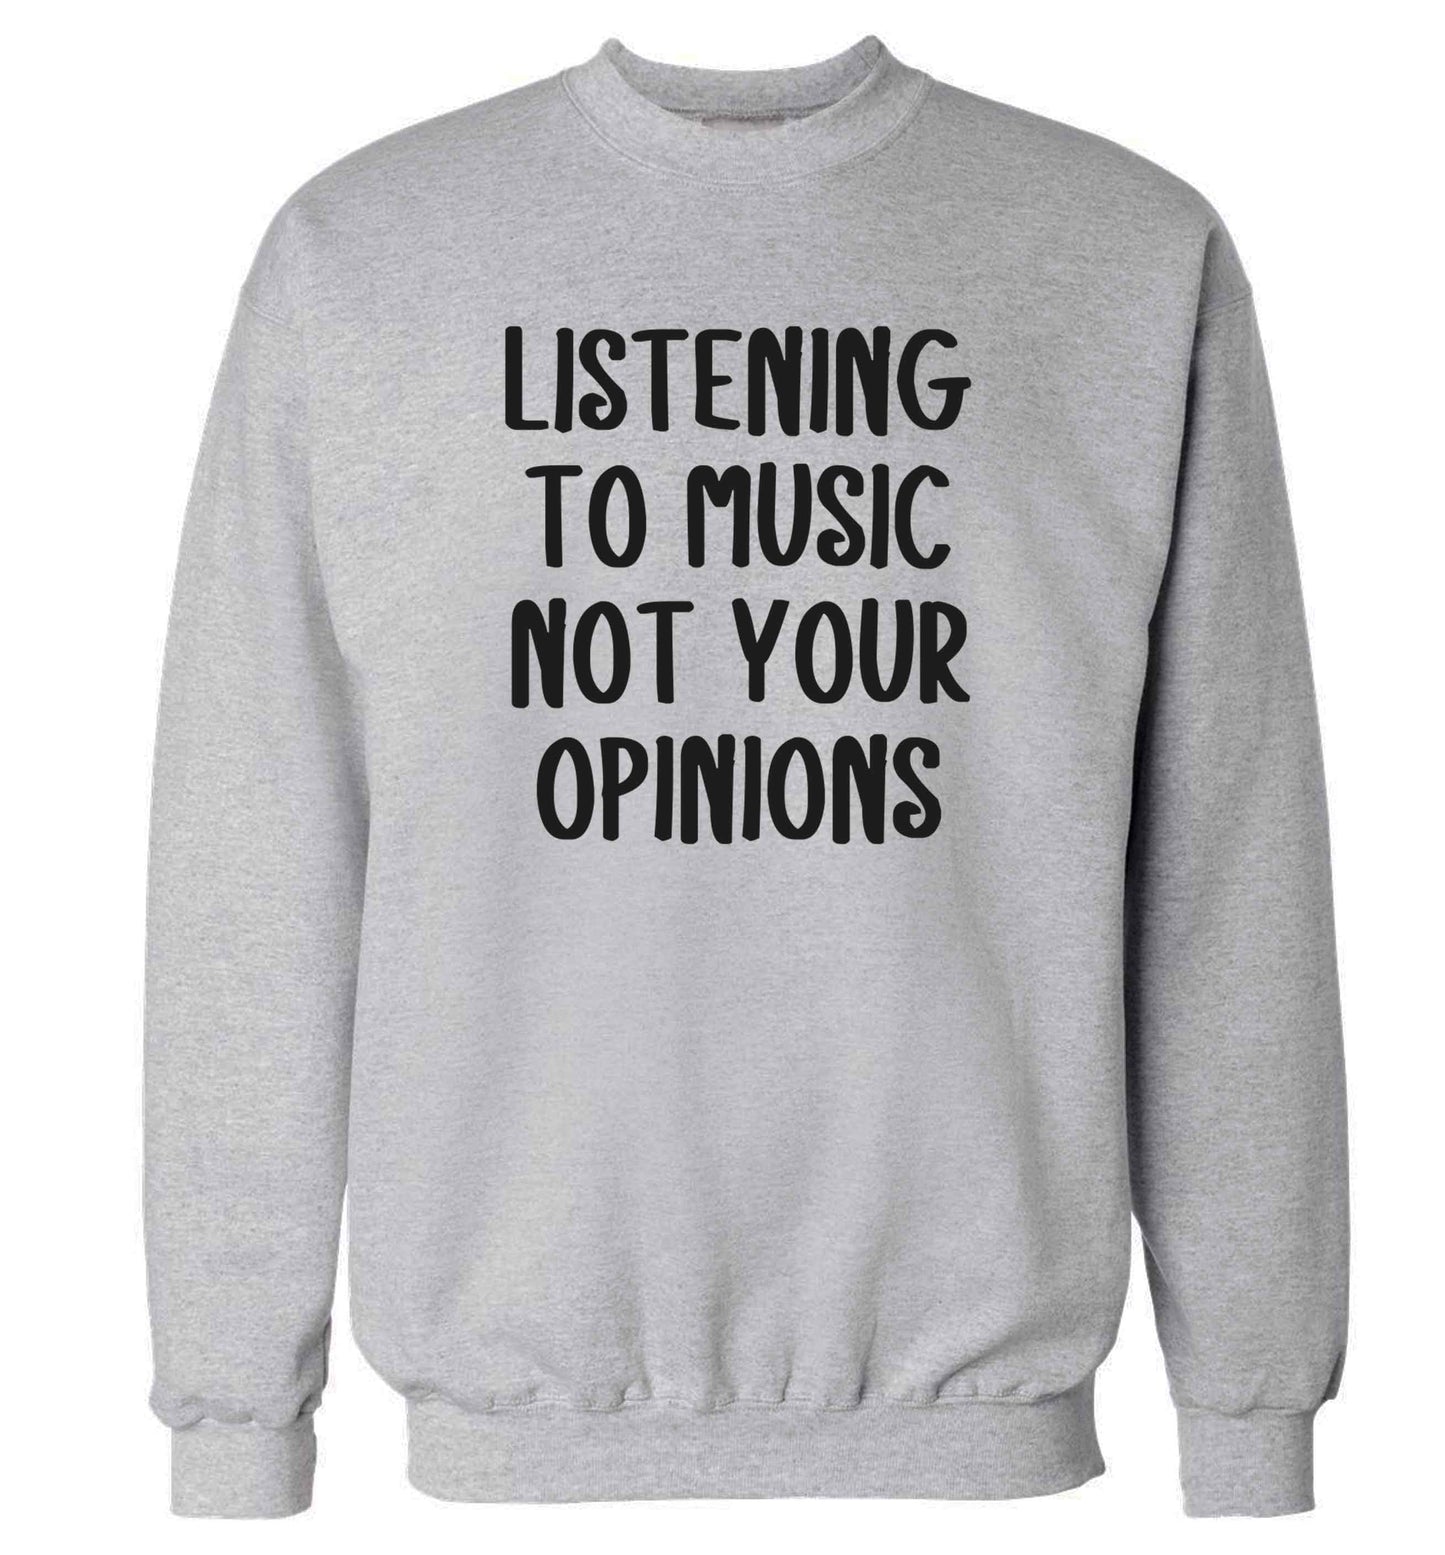 Listening to music not your opinions adult's unisex grey sweater 2XL